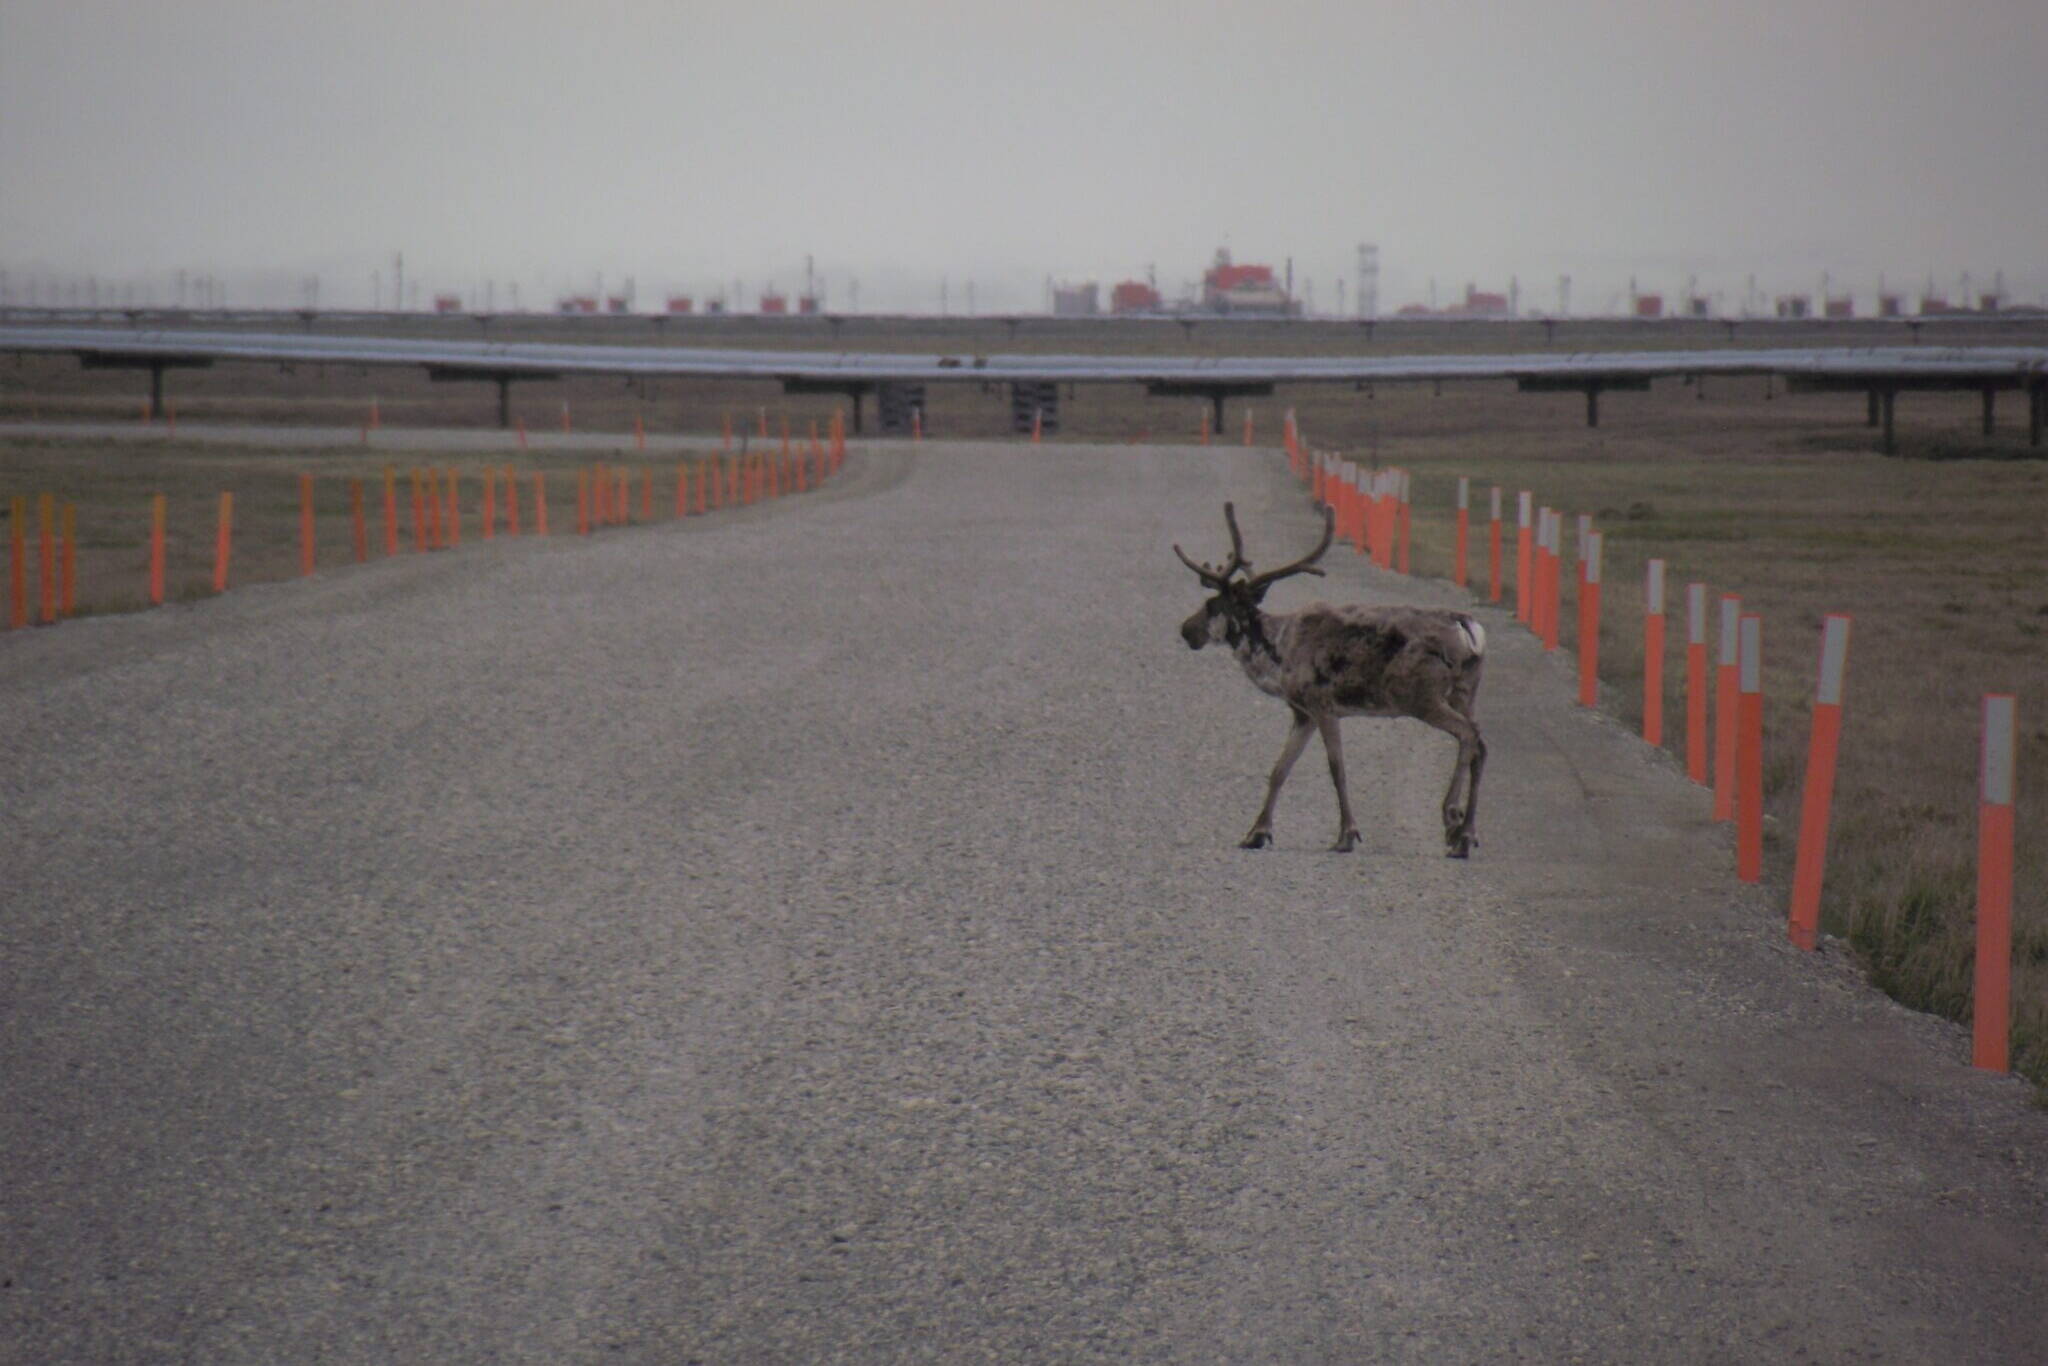 A caribou from the Central Arctic herd crosses a road within the Kuparuk oil field on the North Slope of Alaska in the summer of 2019, during the mosquito harassment period. (Photo by John Severson/U.S. Geological Survey)